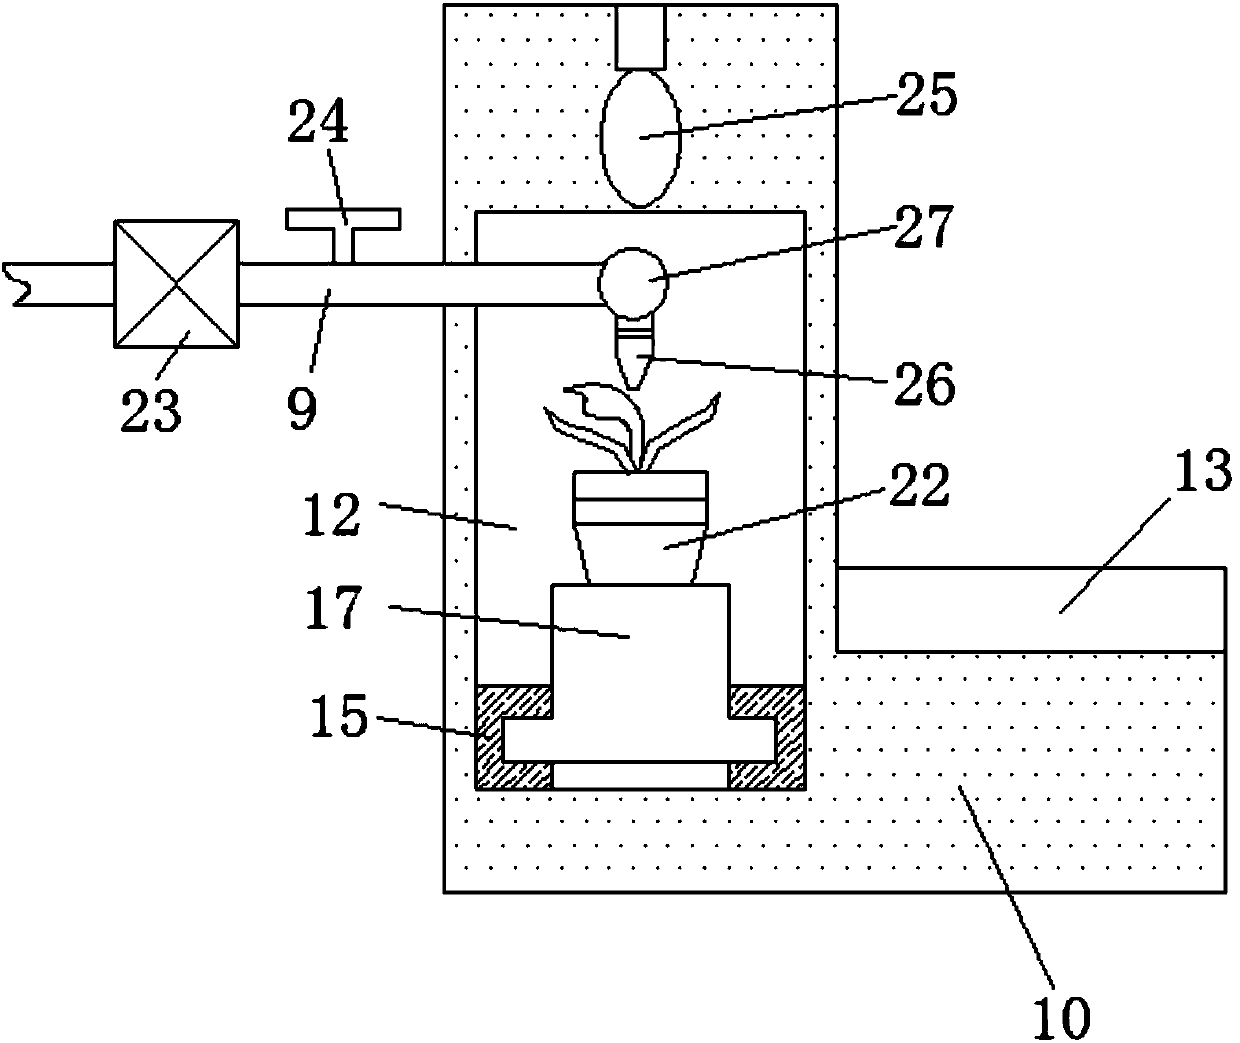 Watering and ornamental device for garden potted plant